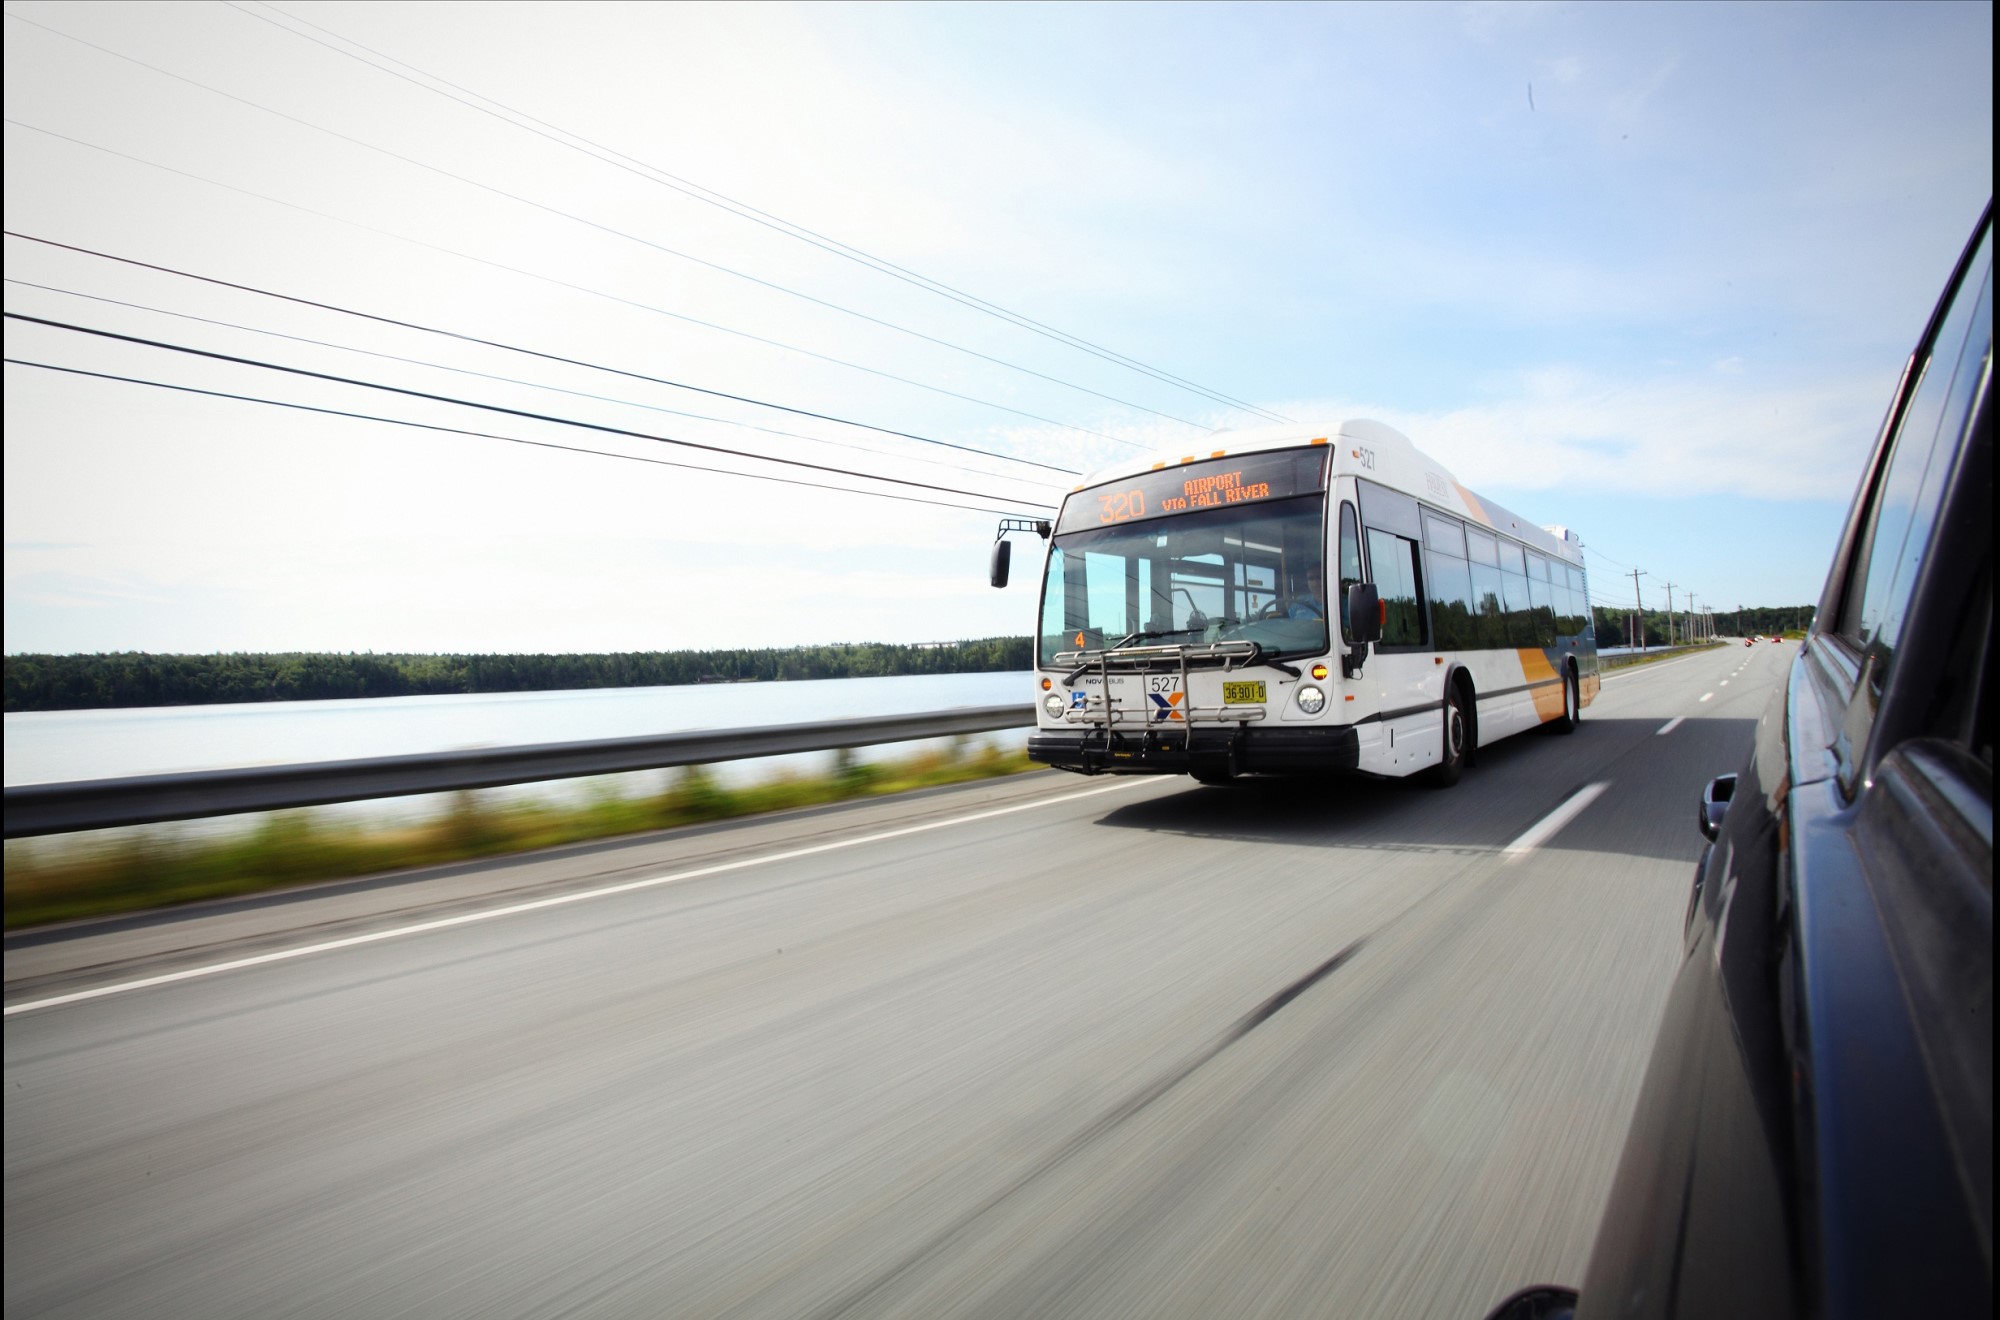 Halifax Transit Route 320 Airport travels on Highway 102.